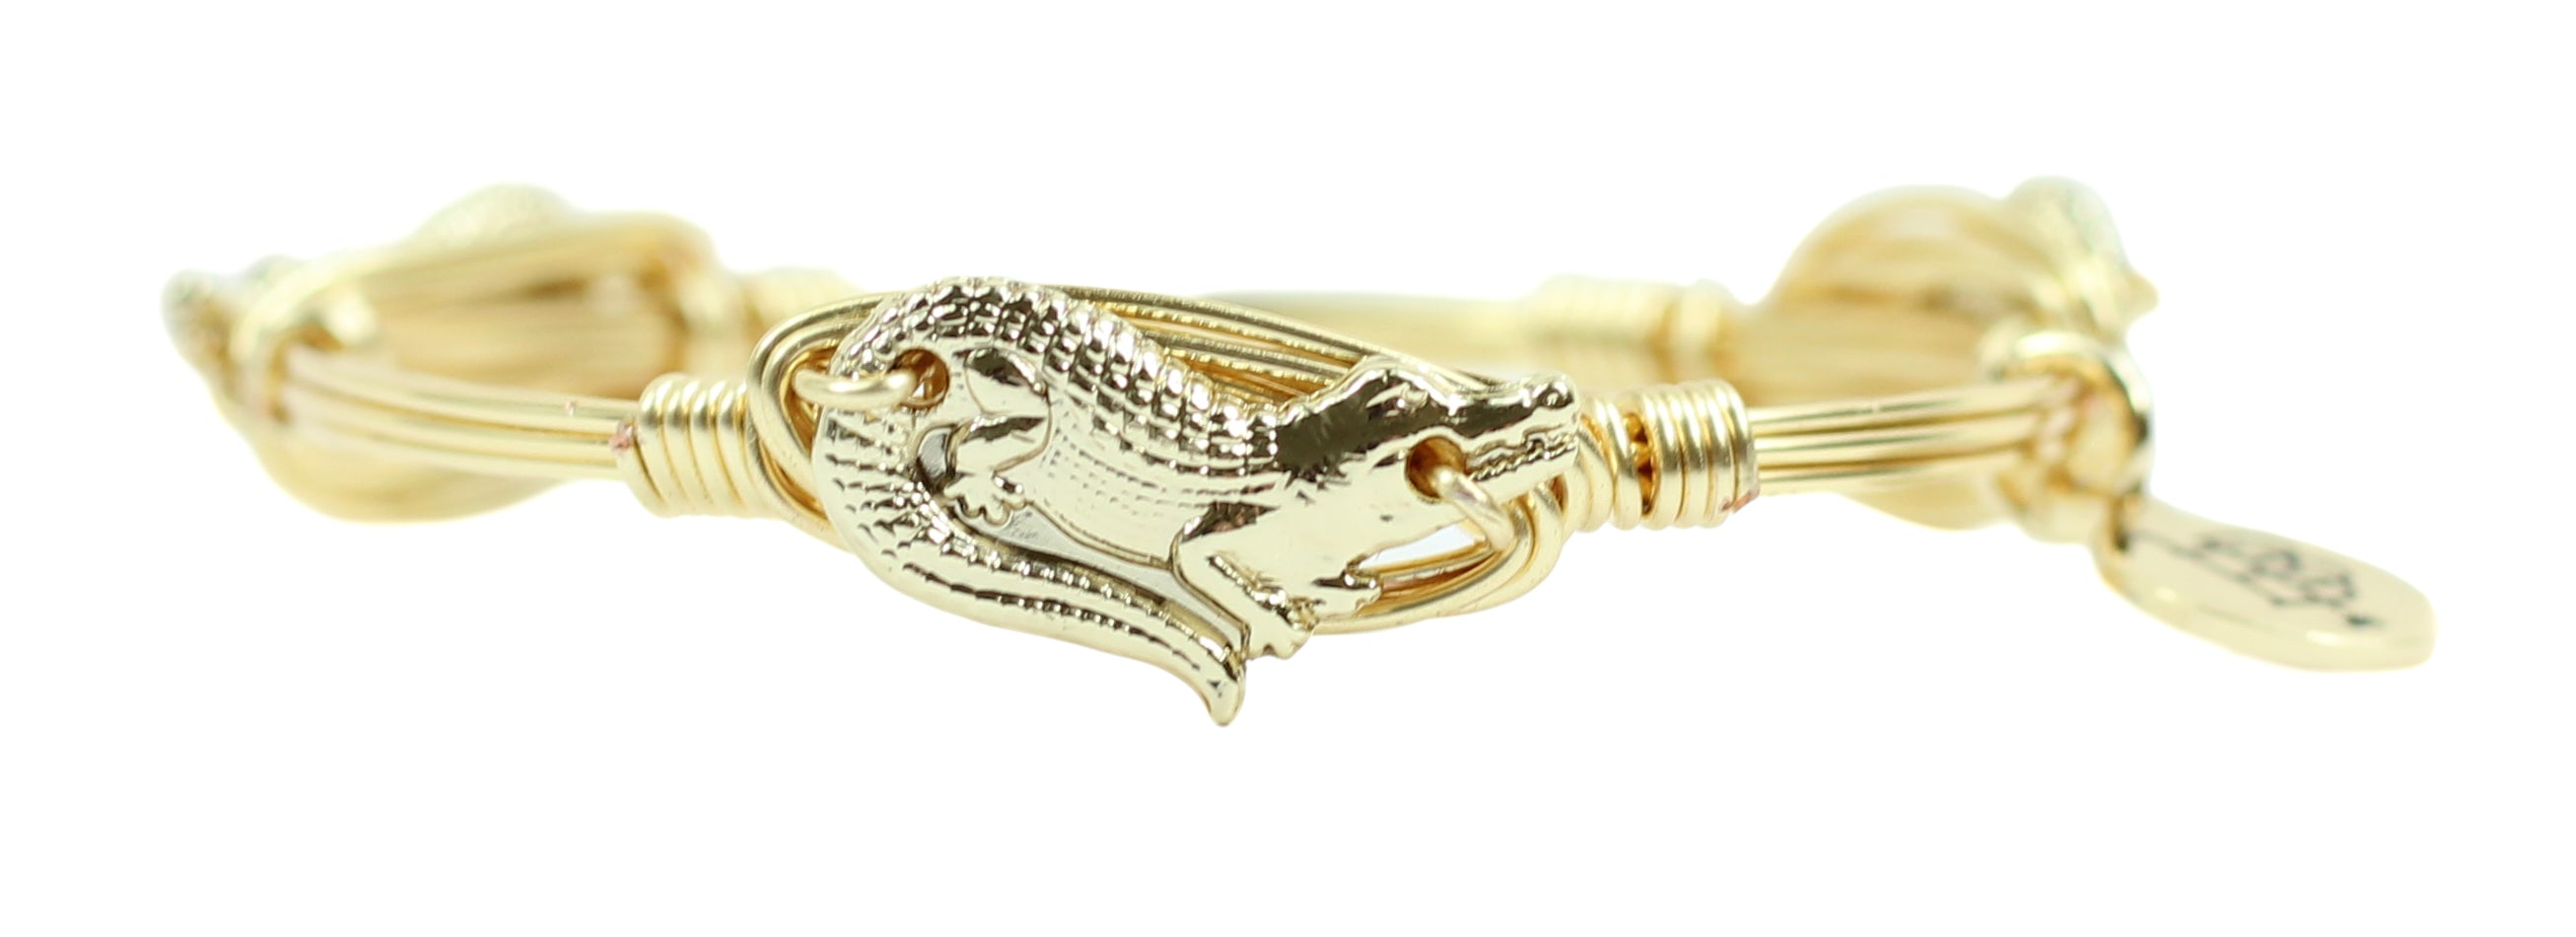 Kids Gold Bracelet Price Starting From Rs 10,000/Pc | Find Verified Sellers  at Justdial